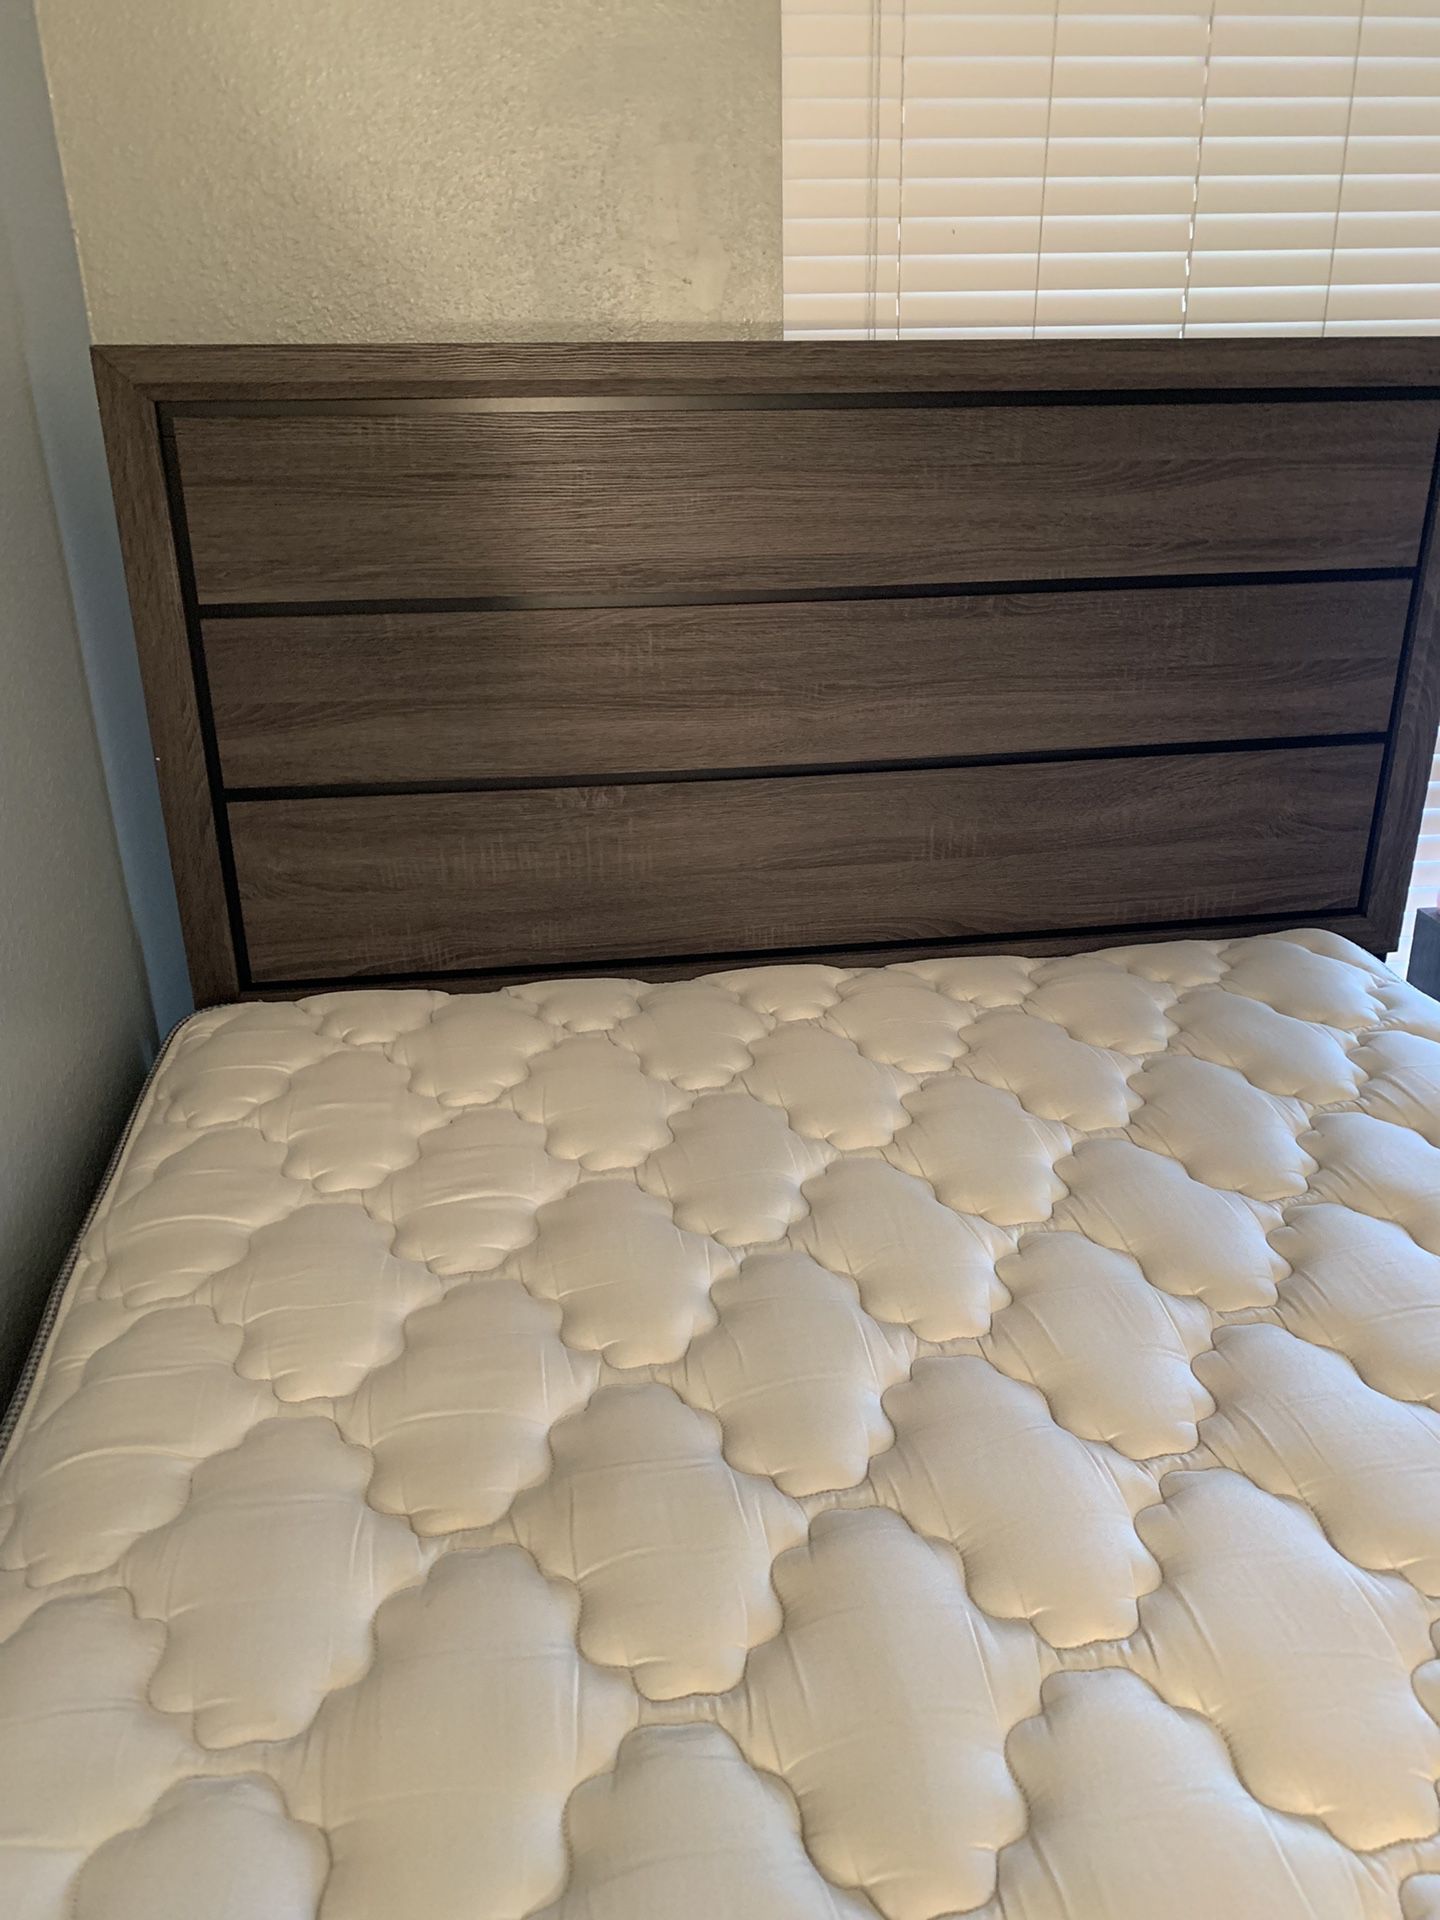 Queen size bed and head boards